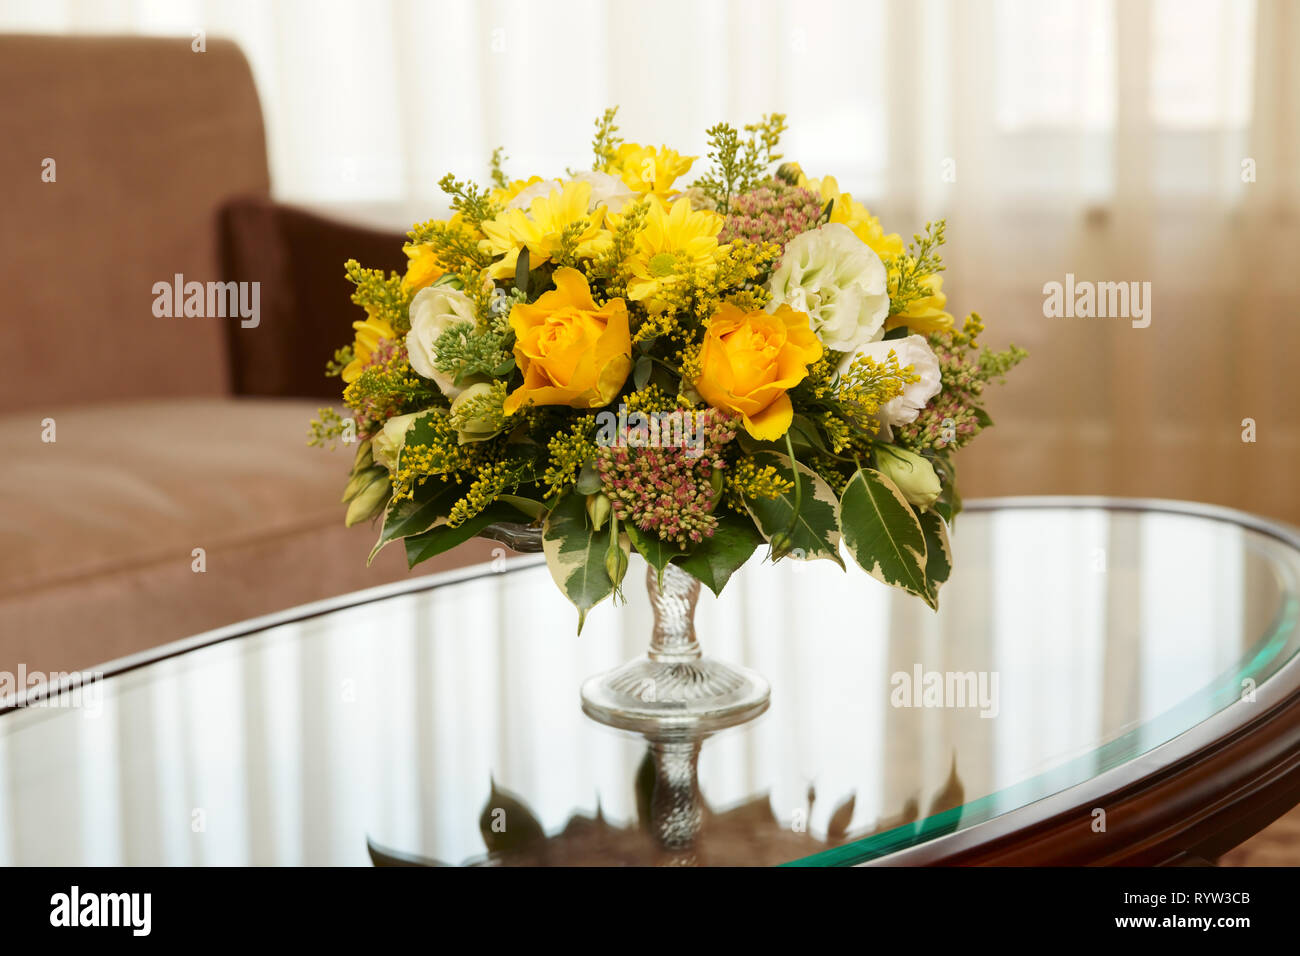 Flowers in a hotel room on coffee table Stock Photo